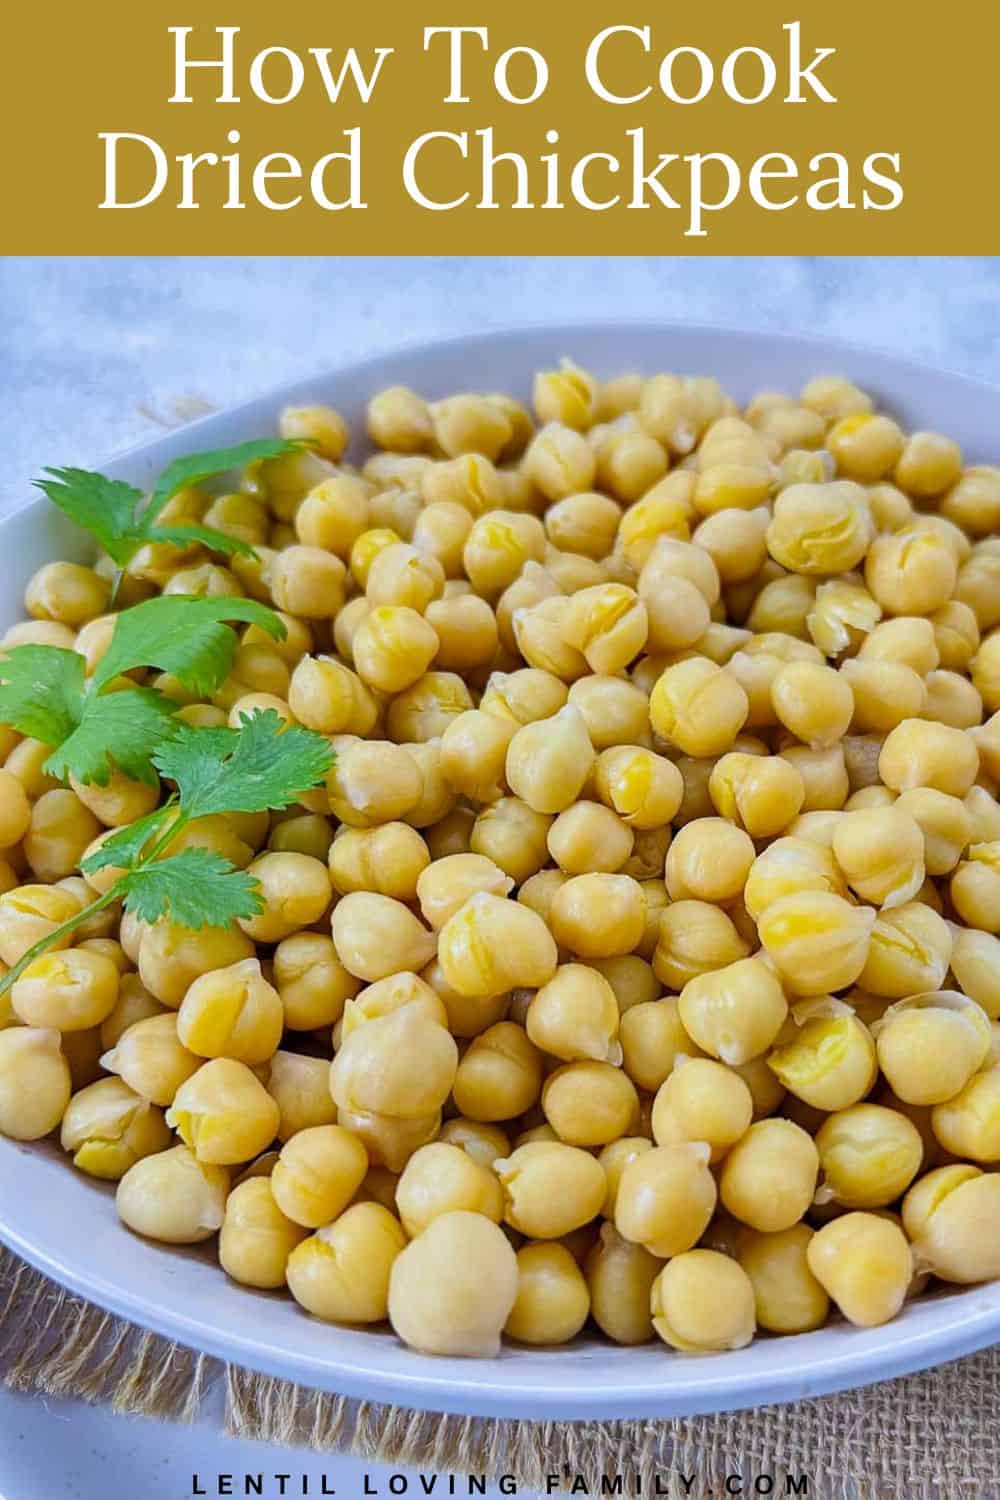 Cooked chickpeas topped with cilantro and placed in a white bowl.